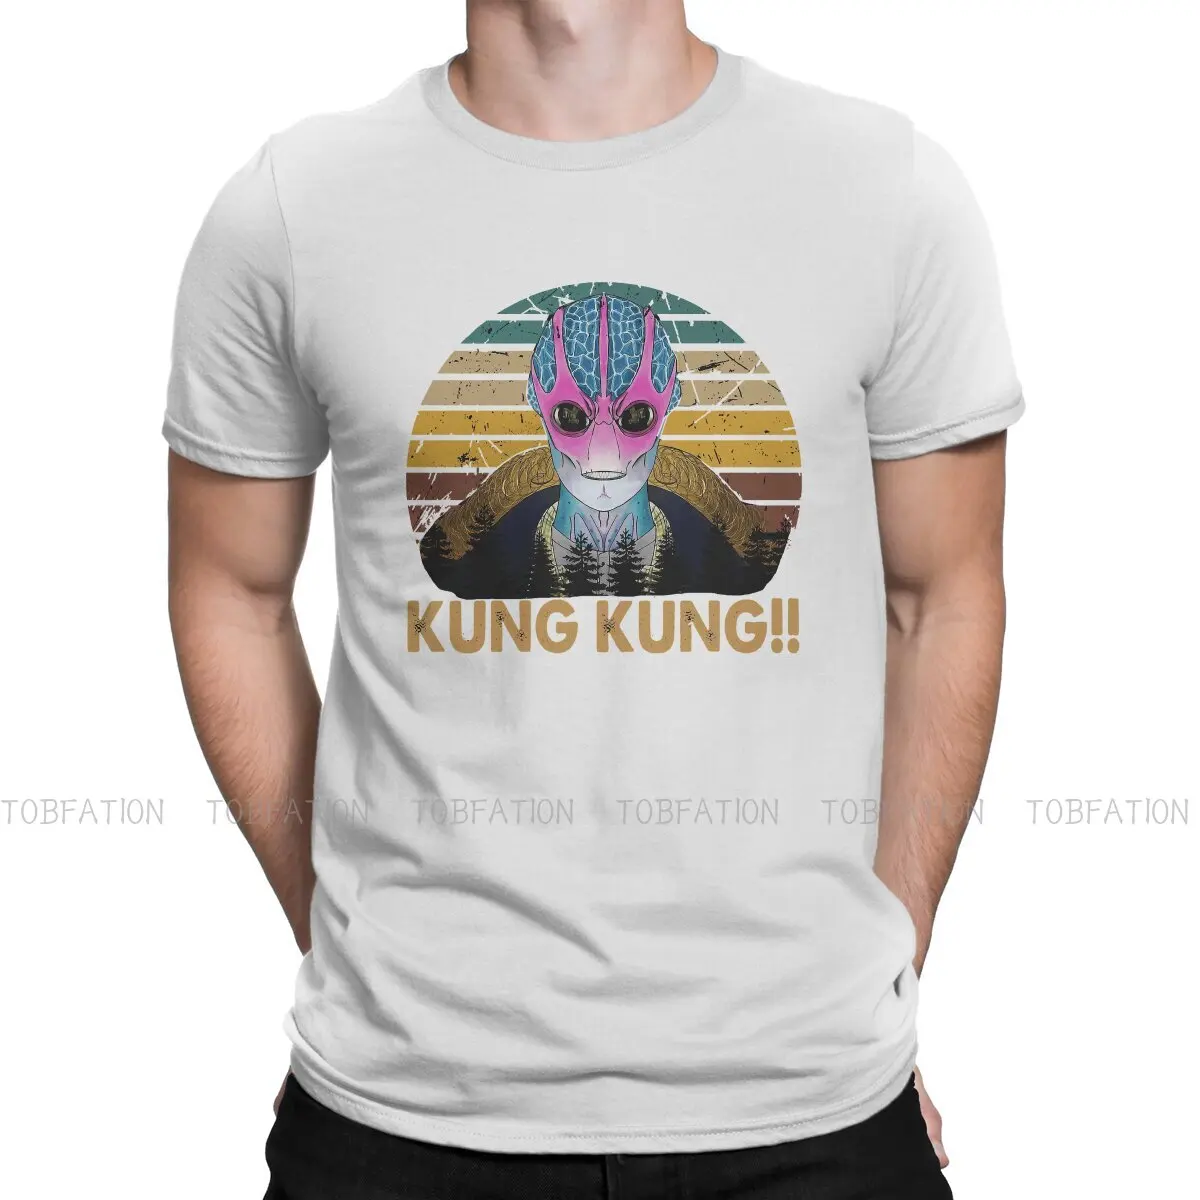 

Resident Alien Alan Wray Tudyk Original TShirts Vintage Kung Kung Personalize Homme T Shirt New Trend Clothing Size S-6XL